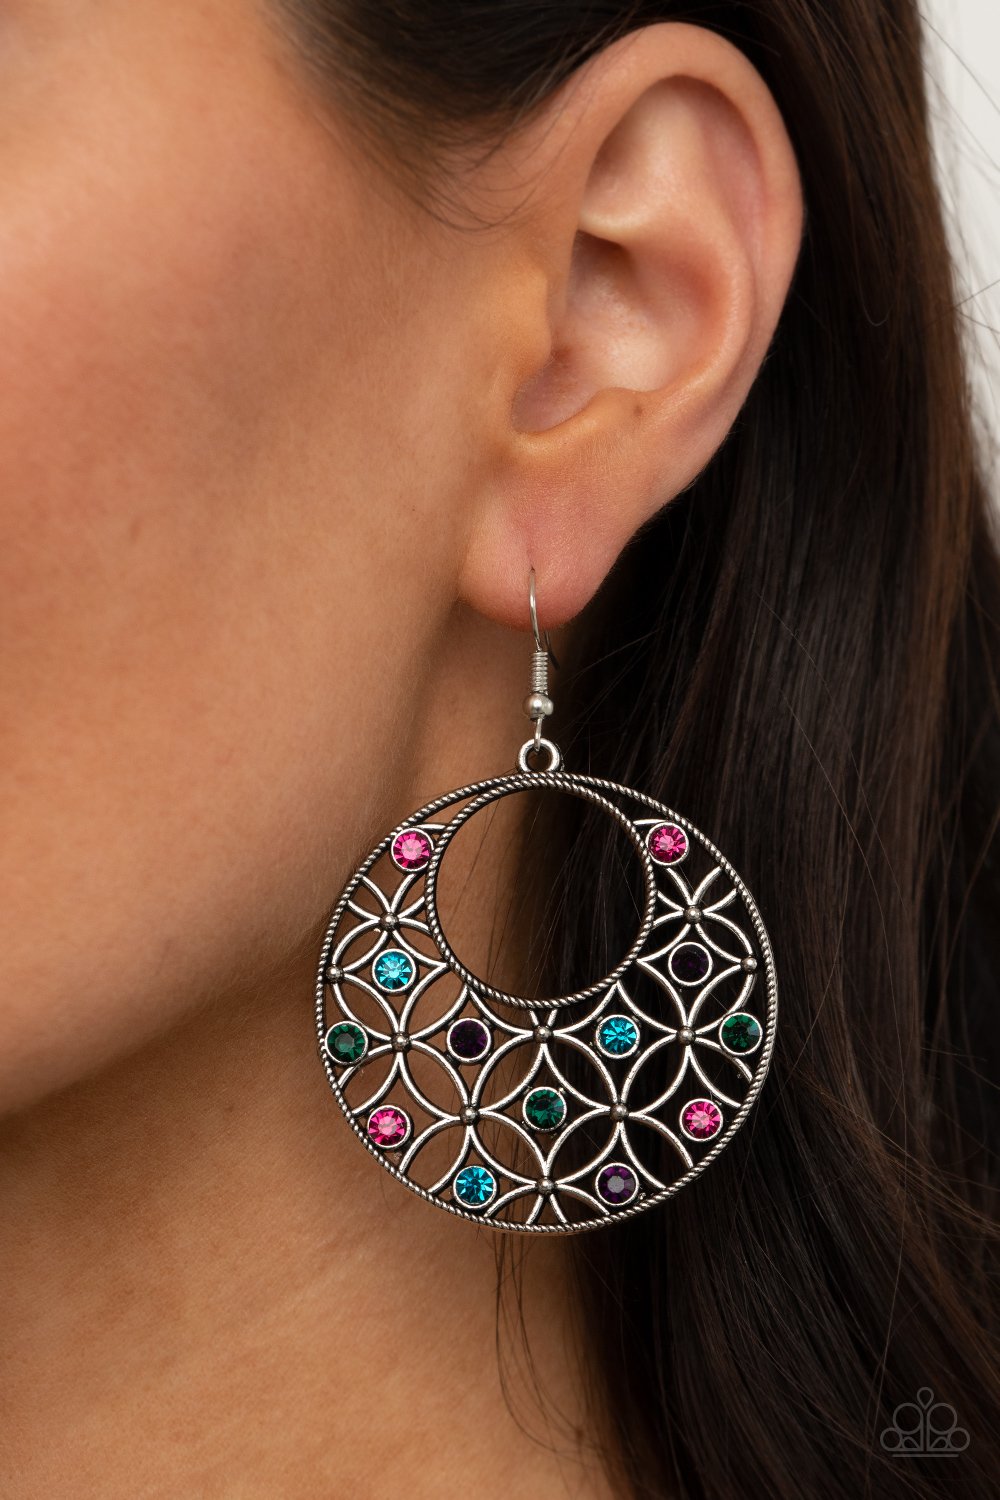 &lt;p&gt;Dotted with glittery blue, green, pink, and purple rhinestones, an airy backdrop of antiqued flowers climbs a studded silver hoop for a whimsical look. Earring attaches to a standard fishhook fitting. &lt;/p&gt;  

&lt;p&gt; &lt;i&gt;  Sold as one pair of earrings. &lt;/i&gt;  &lt;/p&gt;

